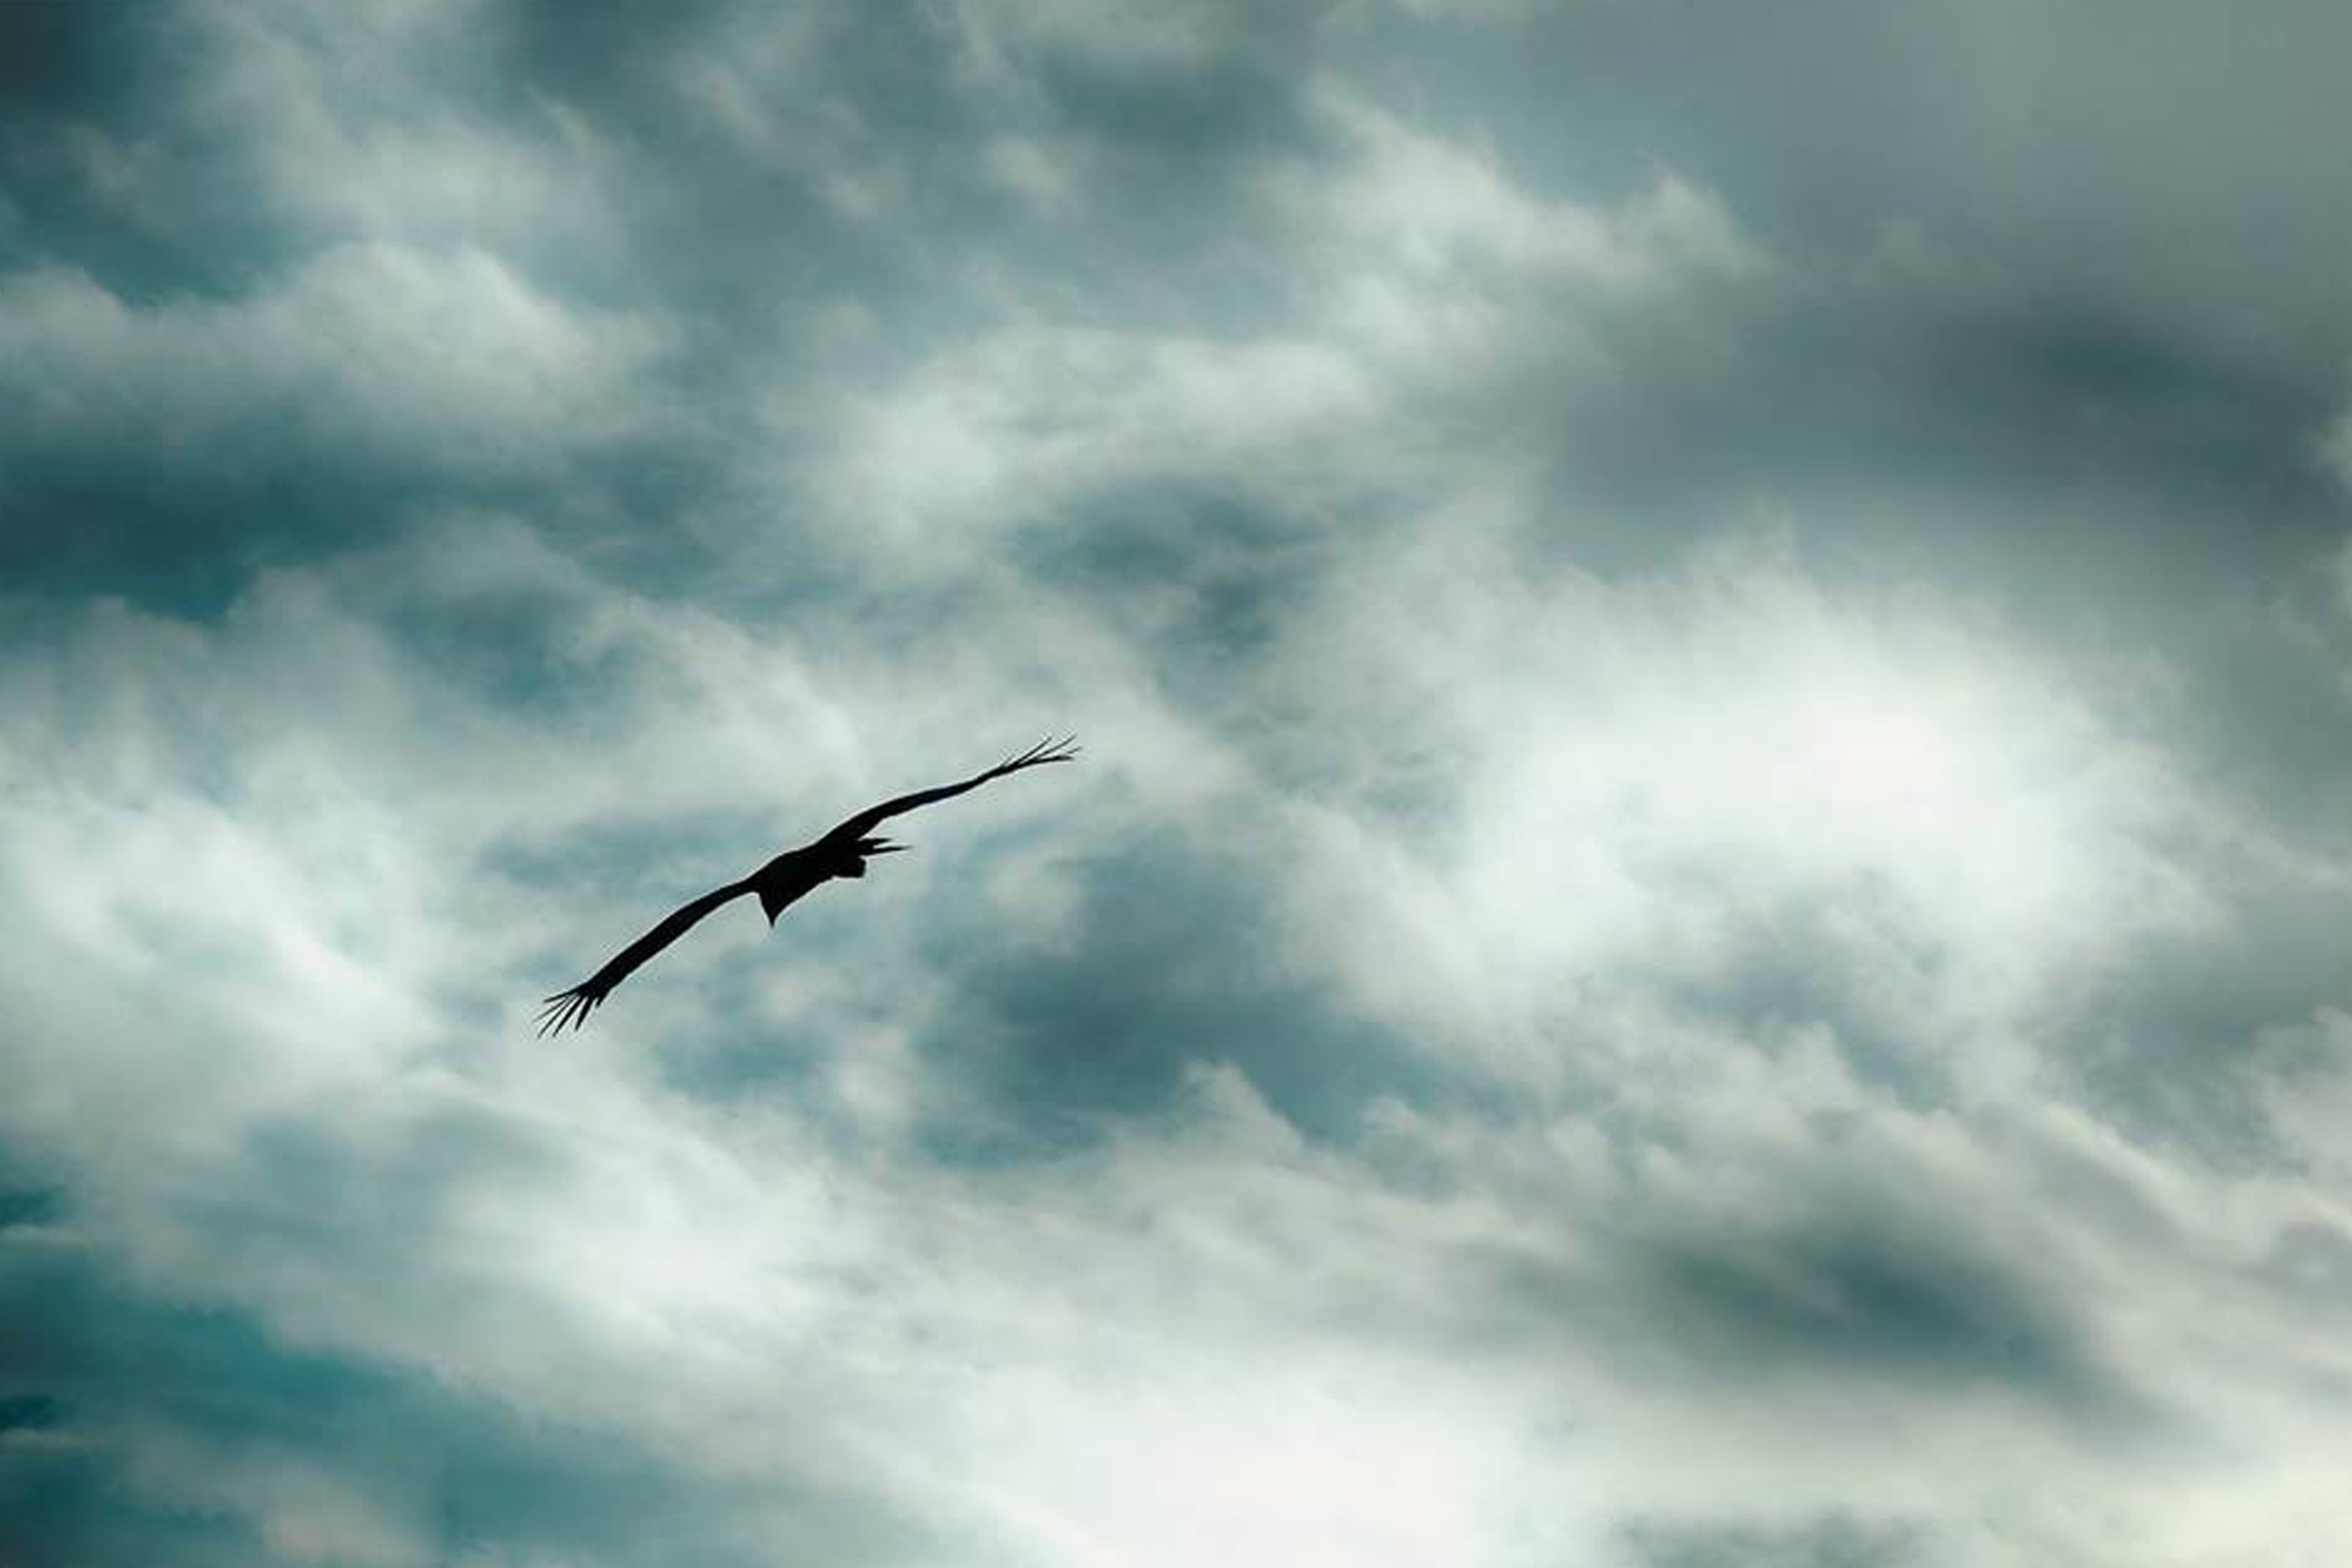 silhouette of bird flying below blue and white cloudy skies